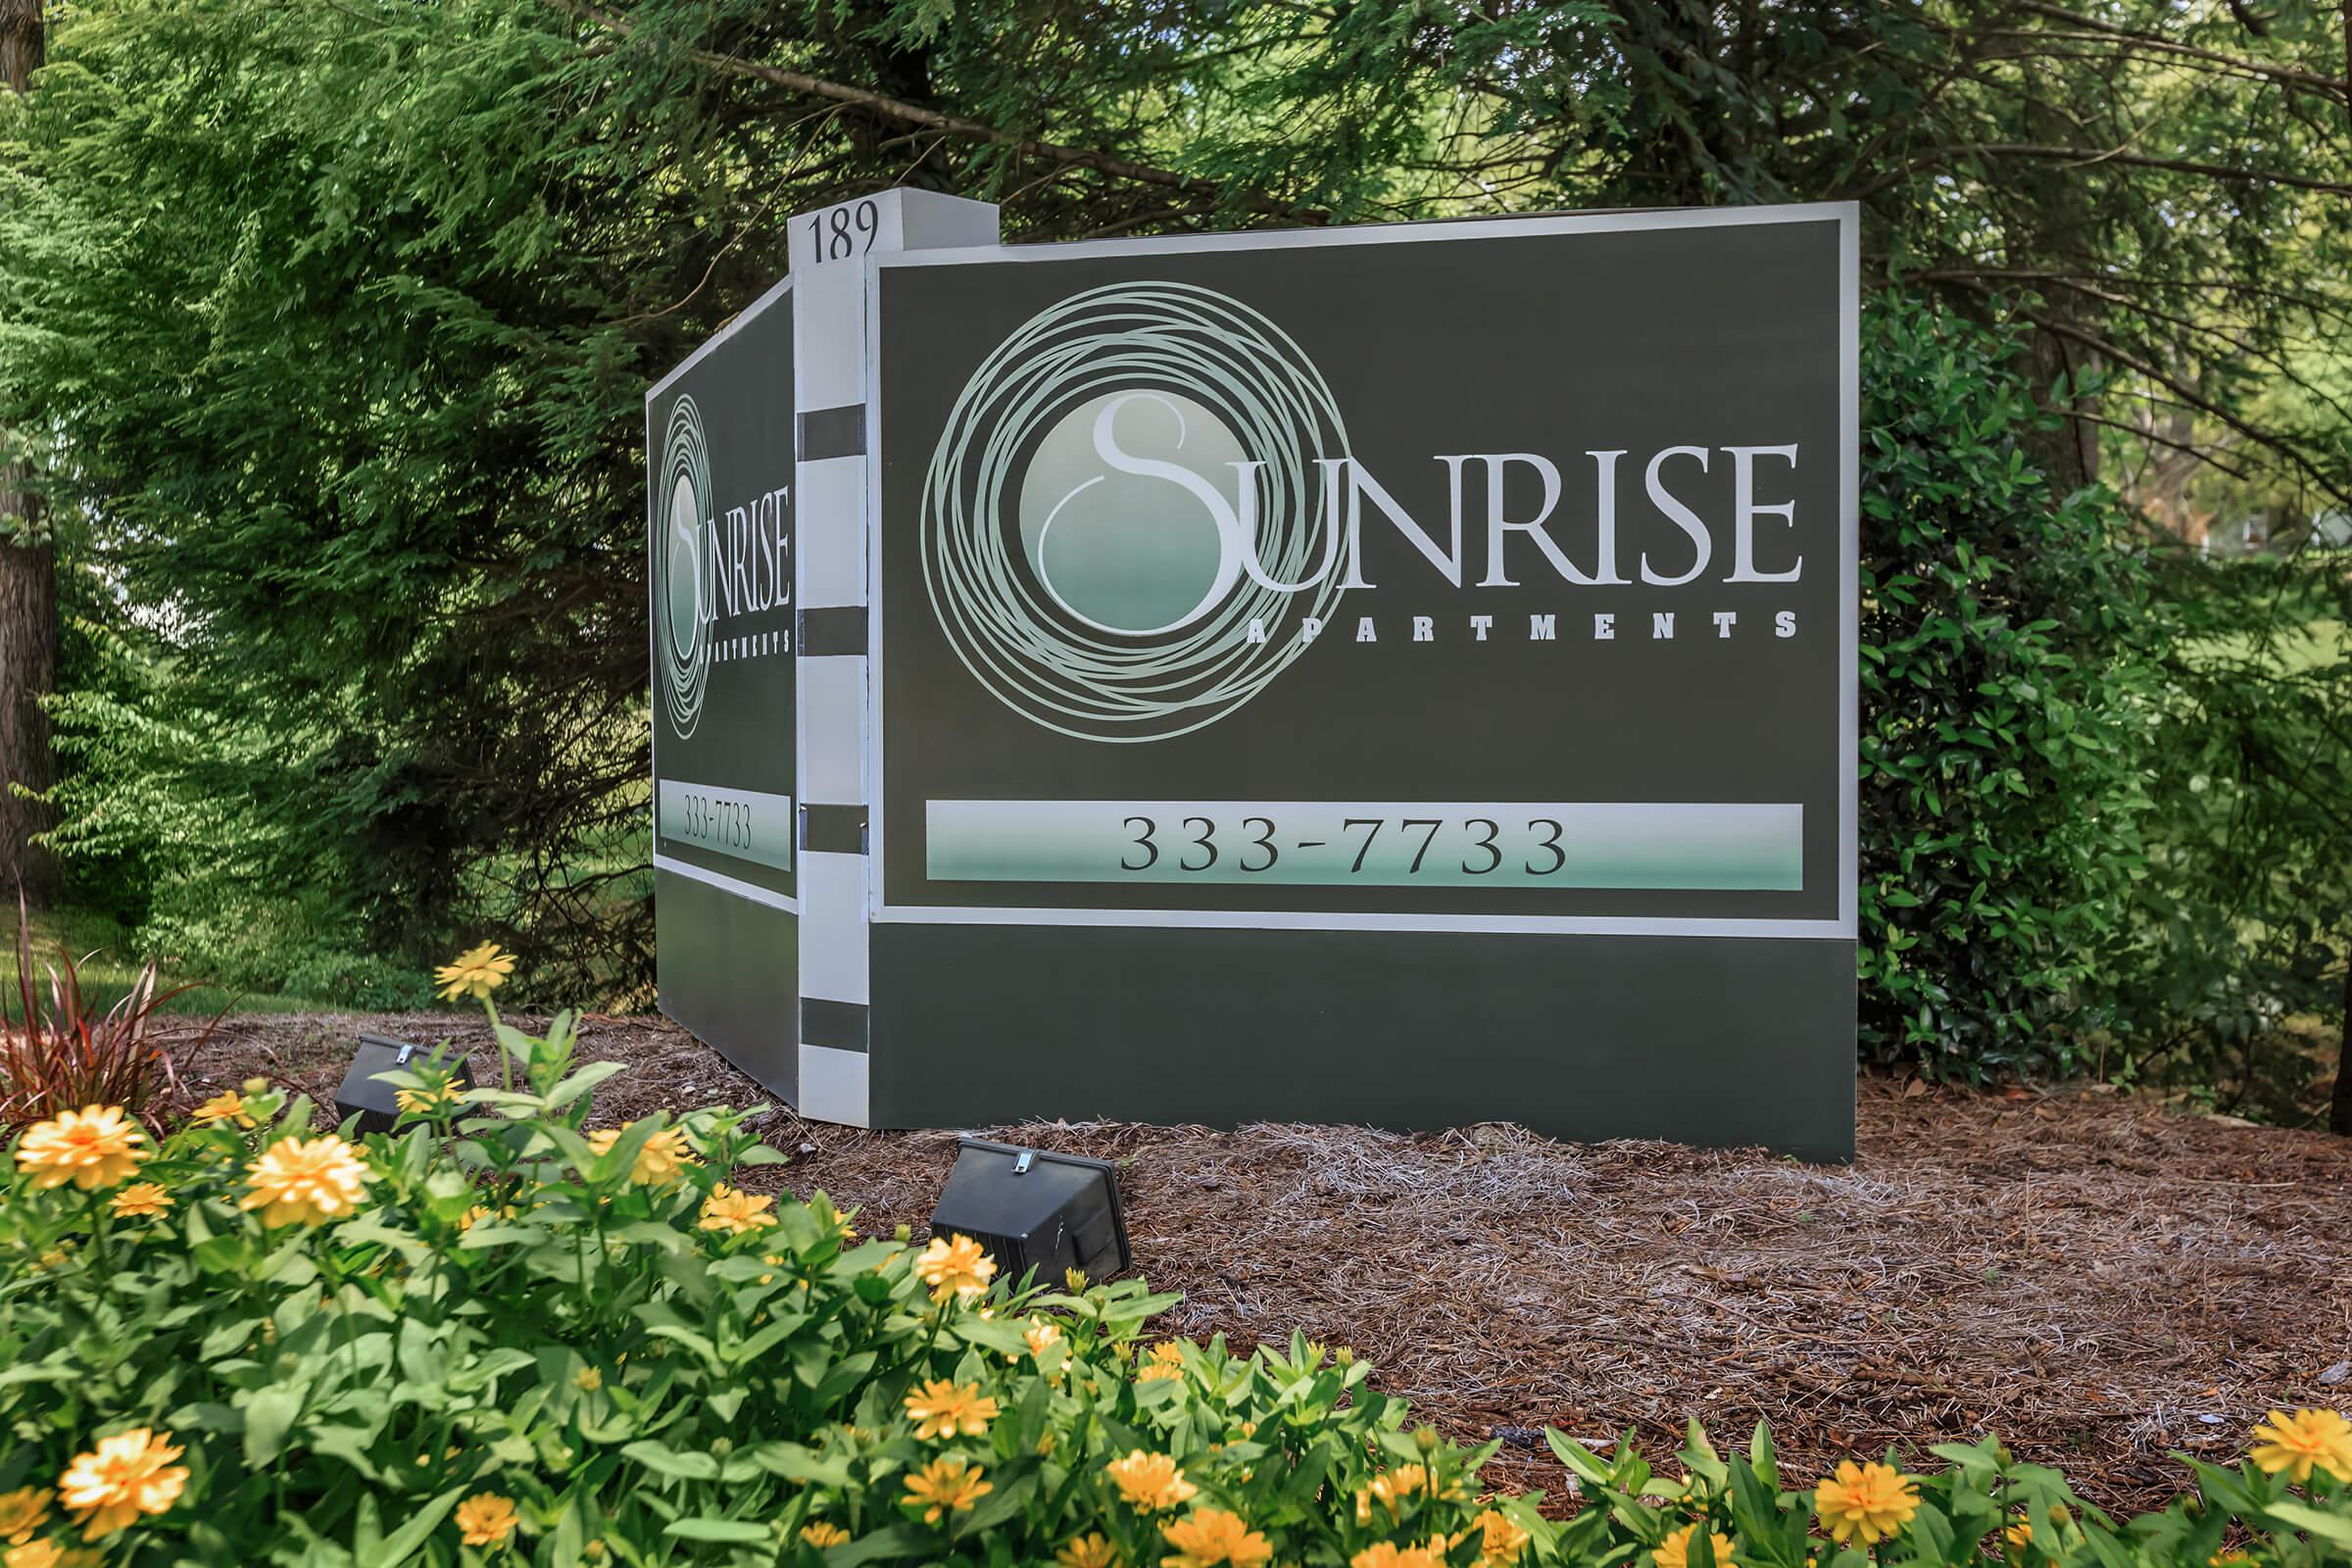 call Sunrise Apartments in Nashville, Tennessee your new home